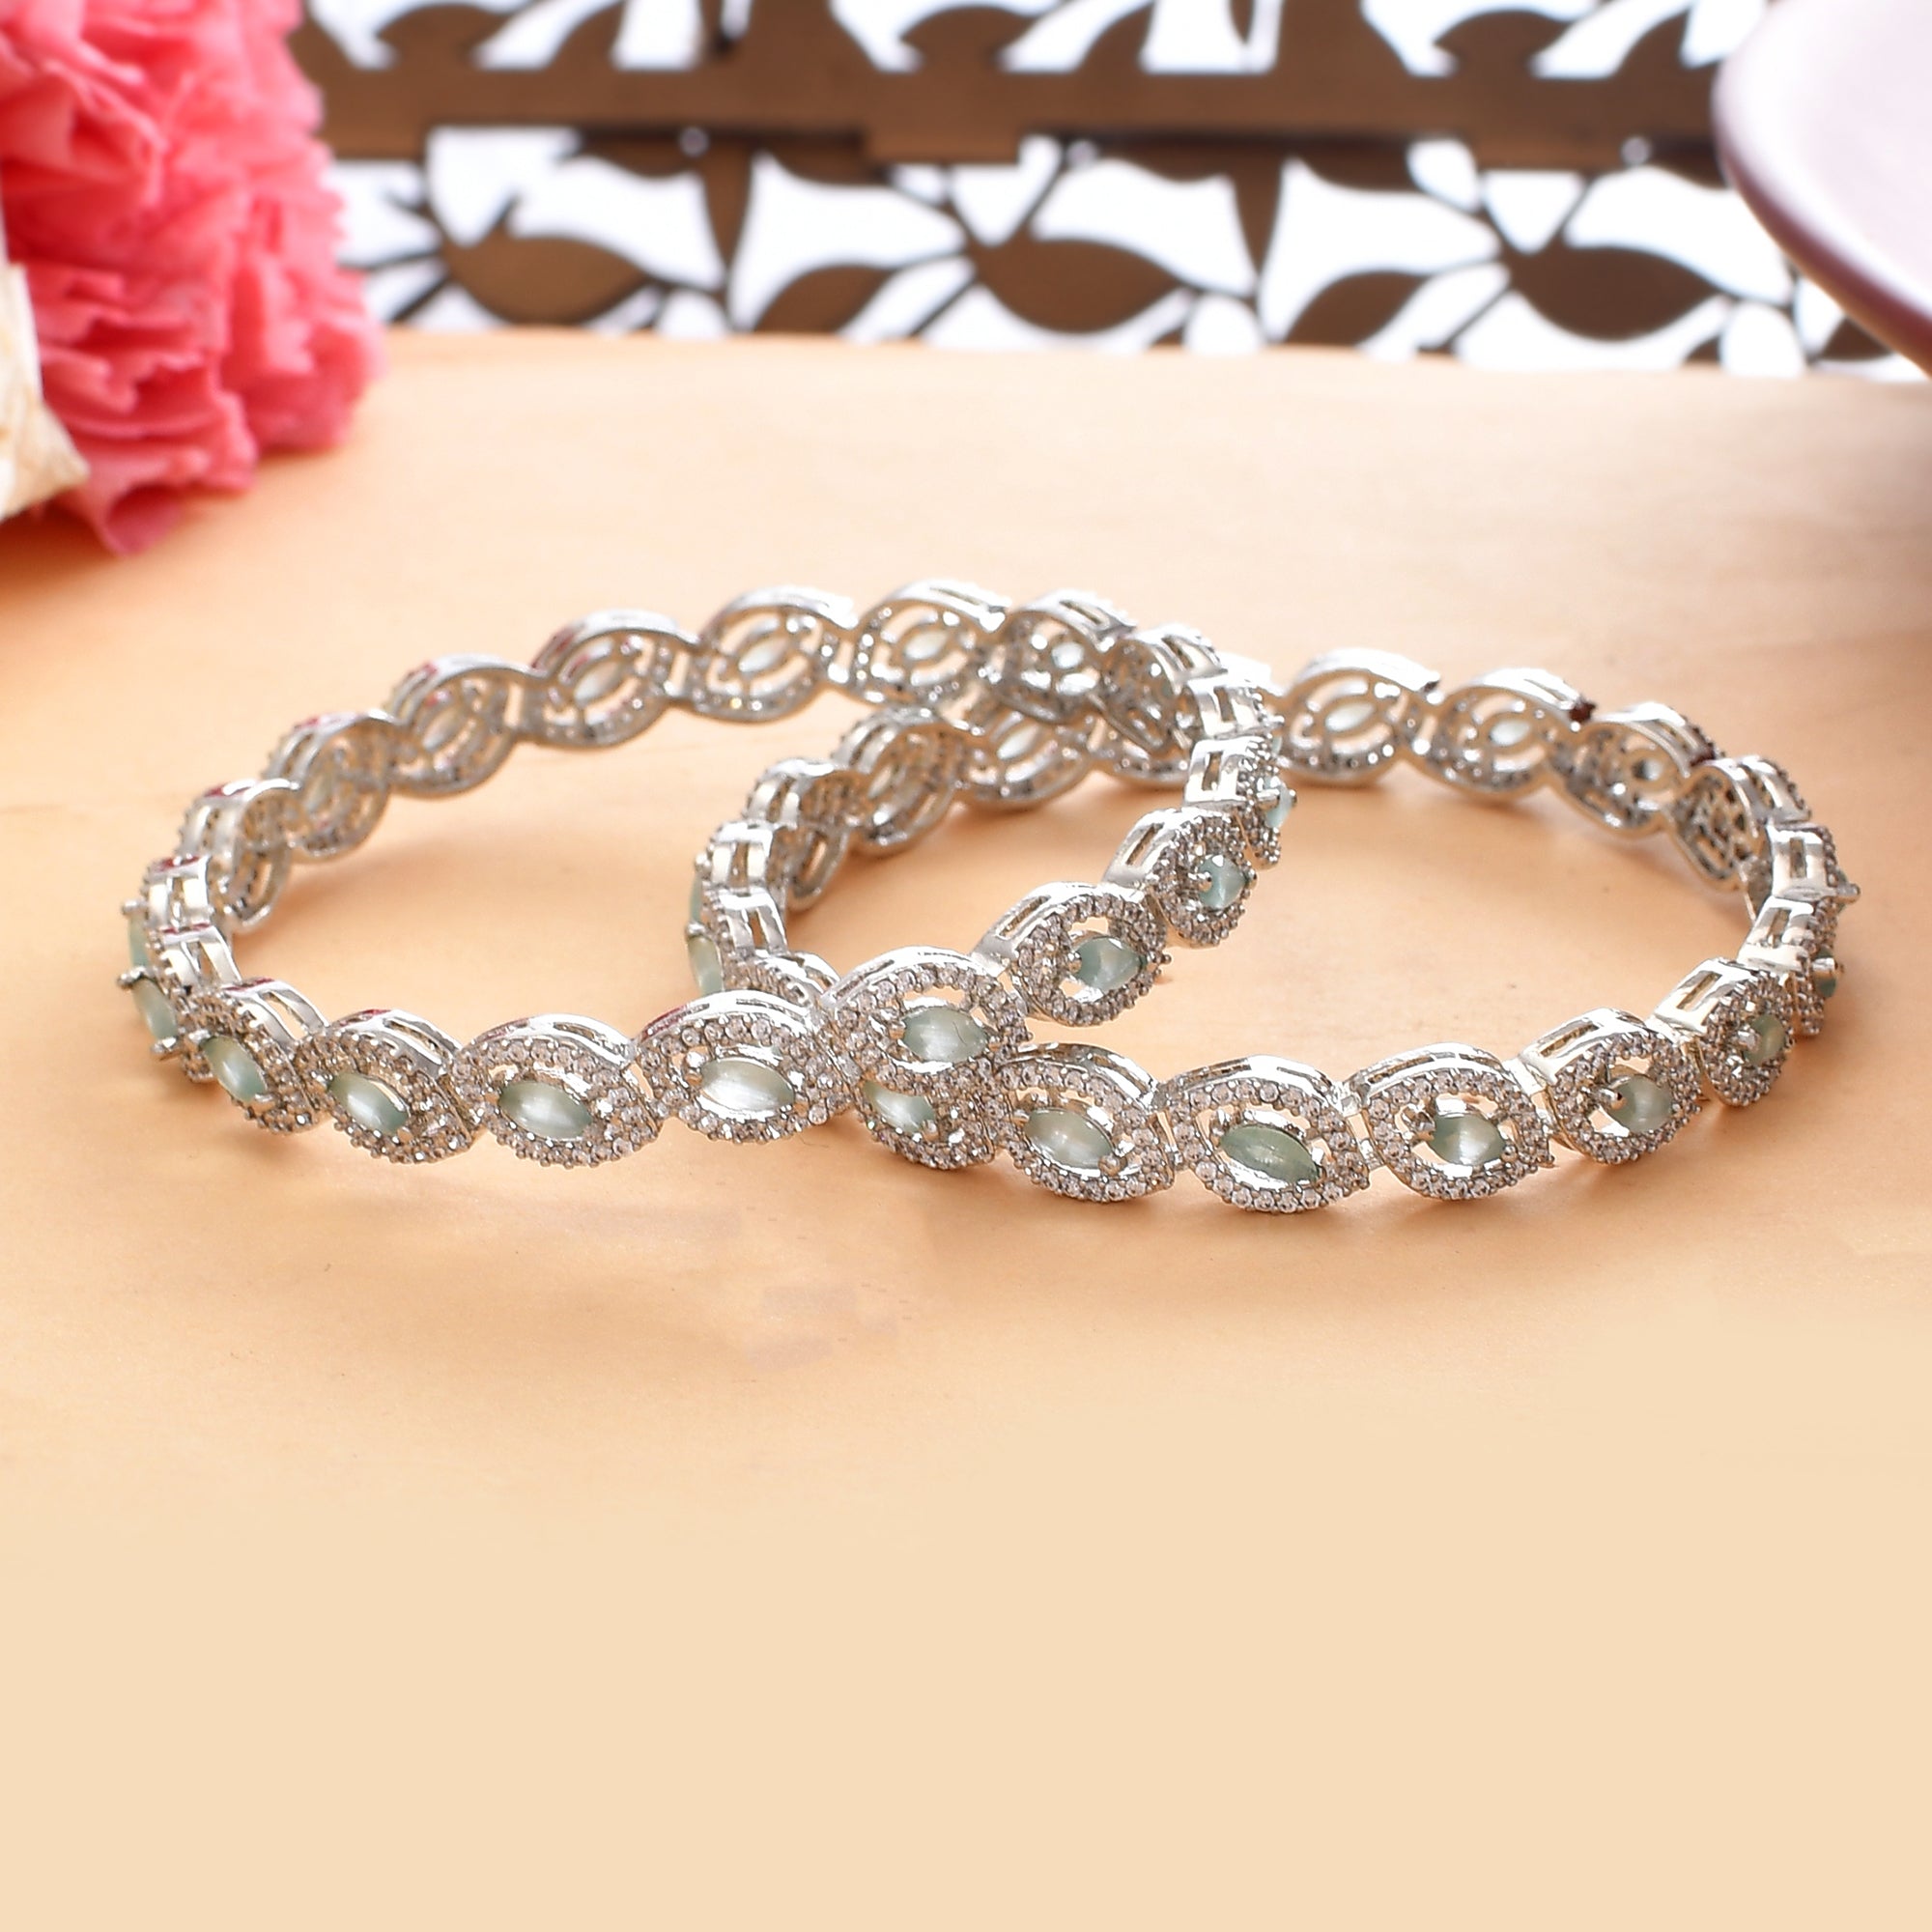 Cz Elegance Classy Pair Of Bangles In Silver Plating